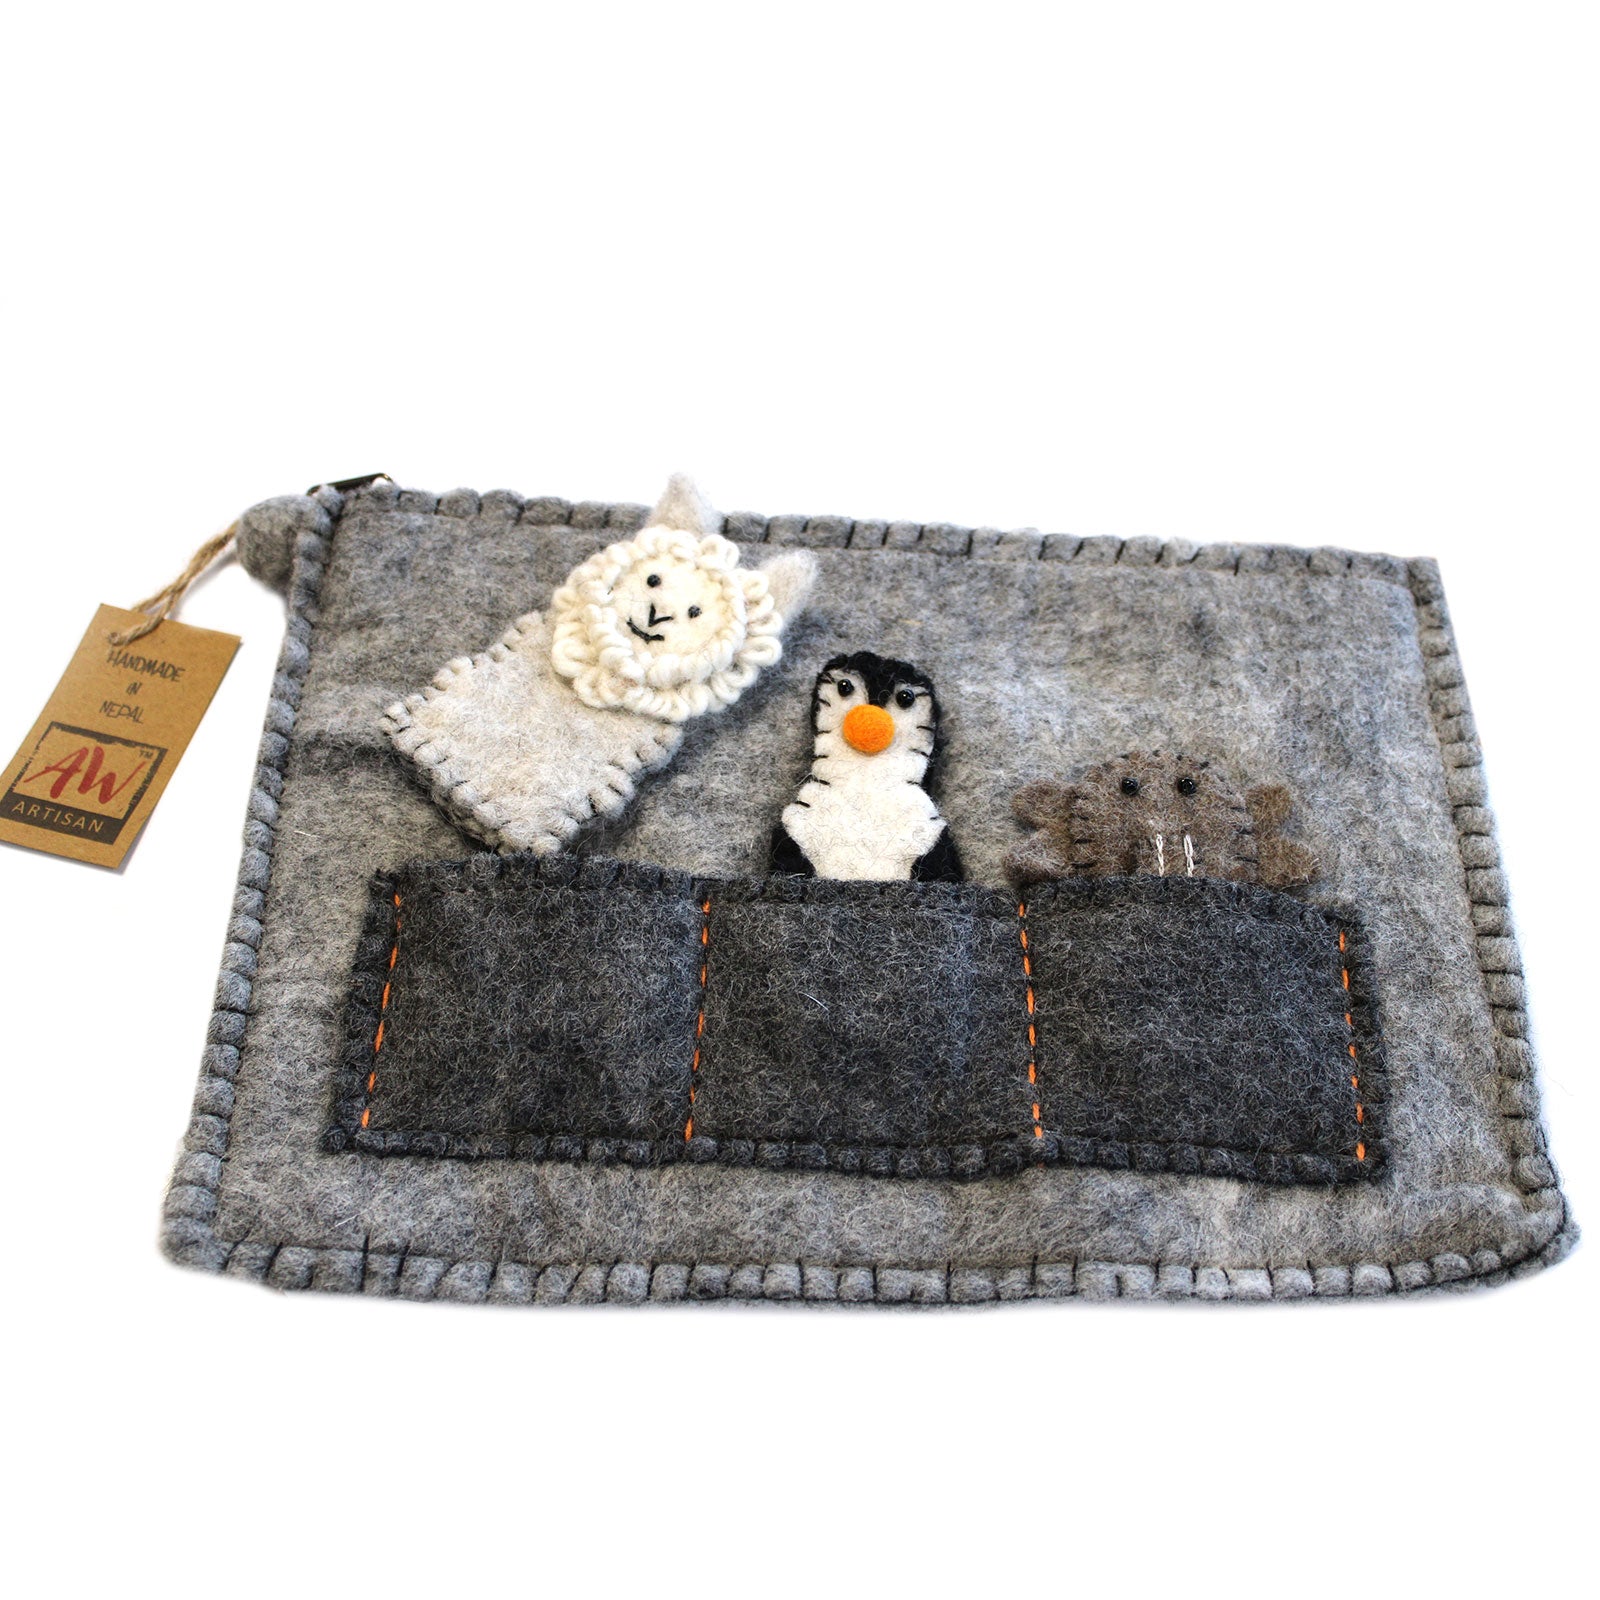 View Tablet Pouch with Finger Puppets information